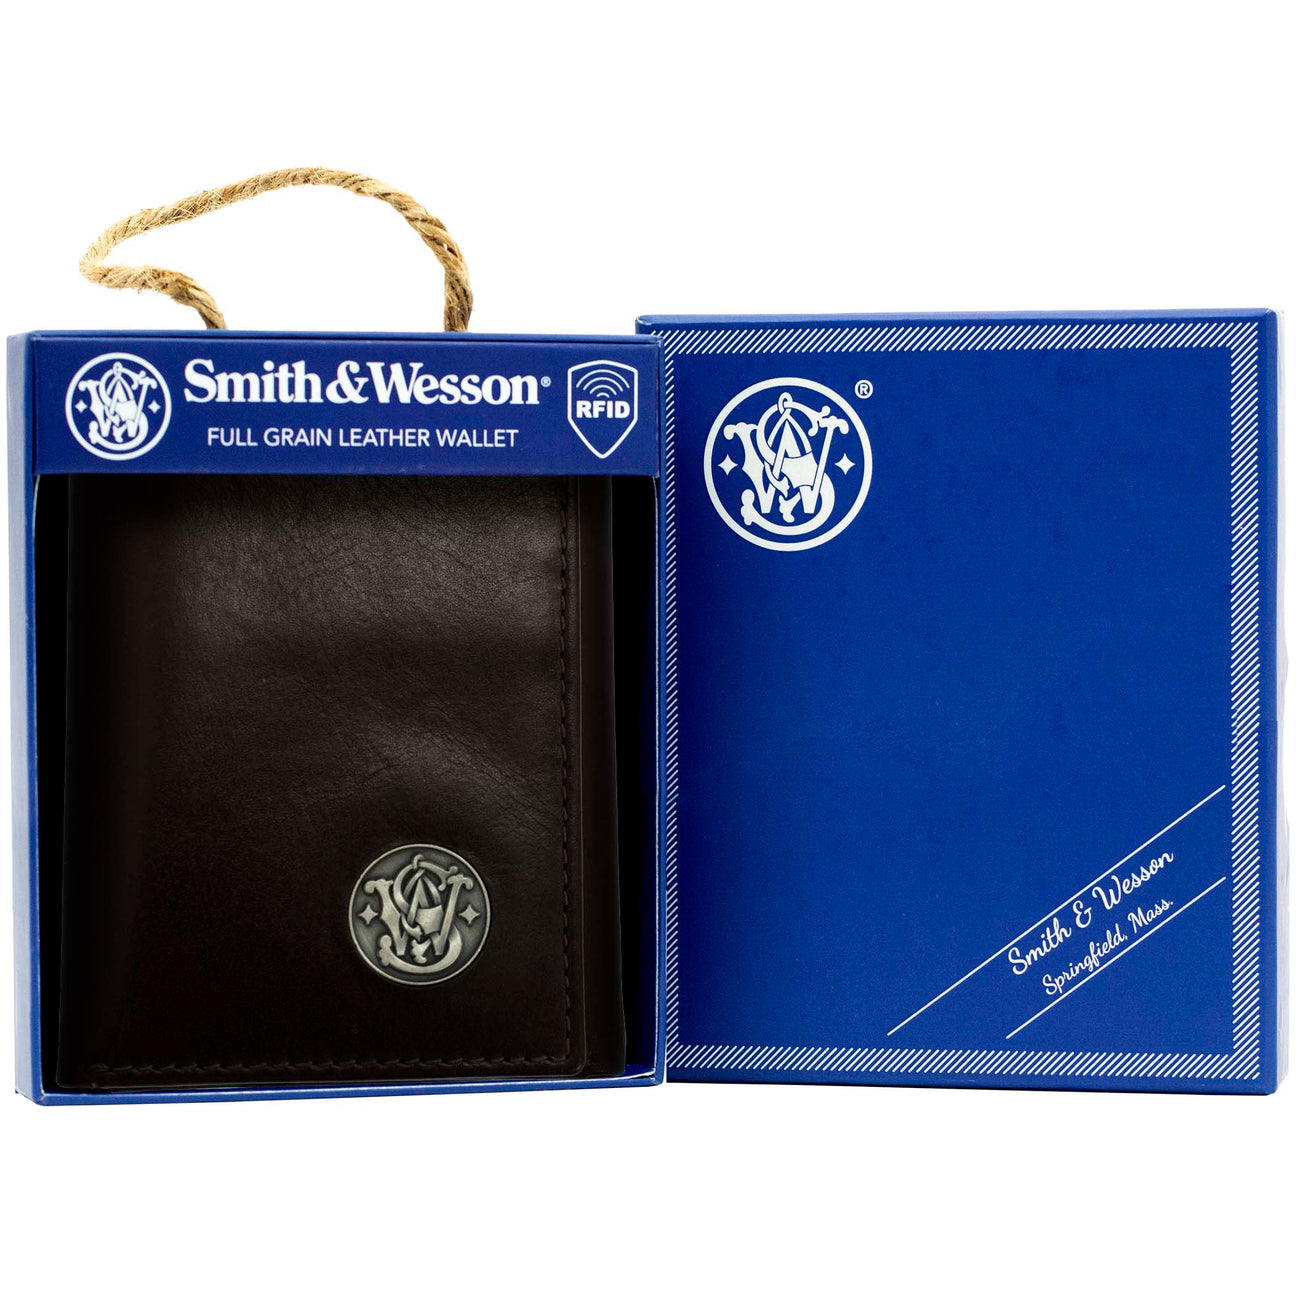 Smith & Wesson Tri-Fold Wallet – Cameleon Bags